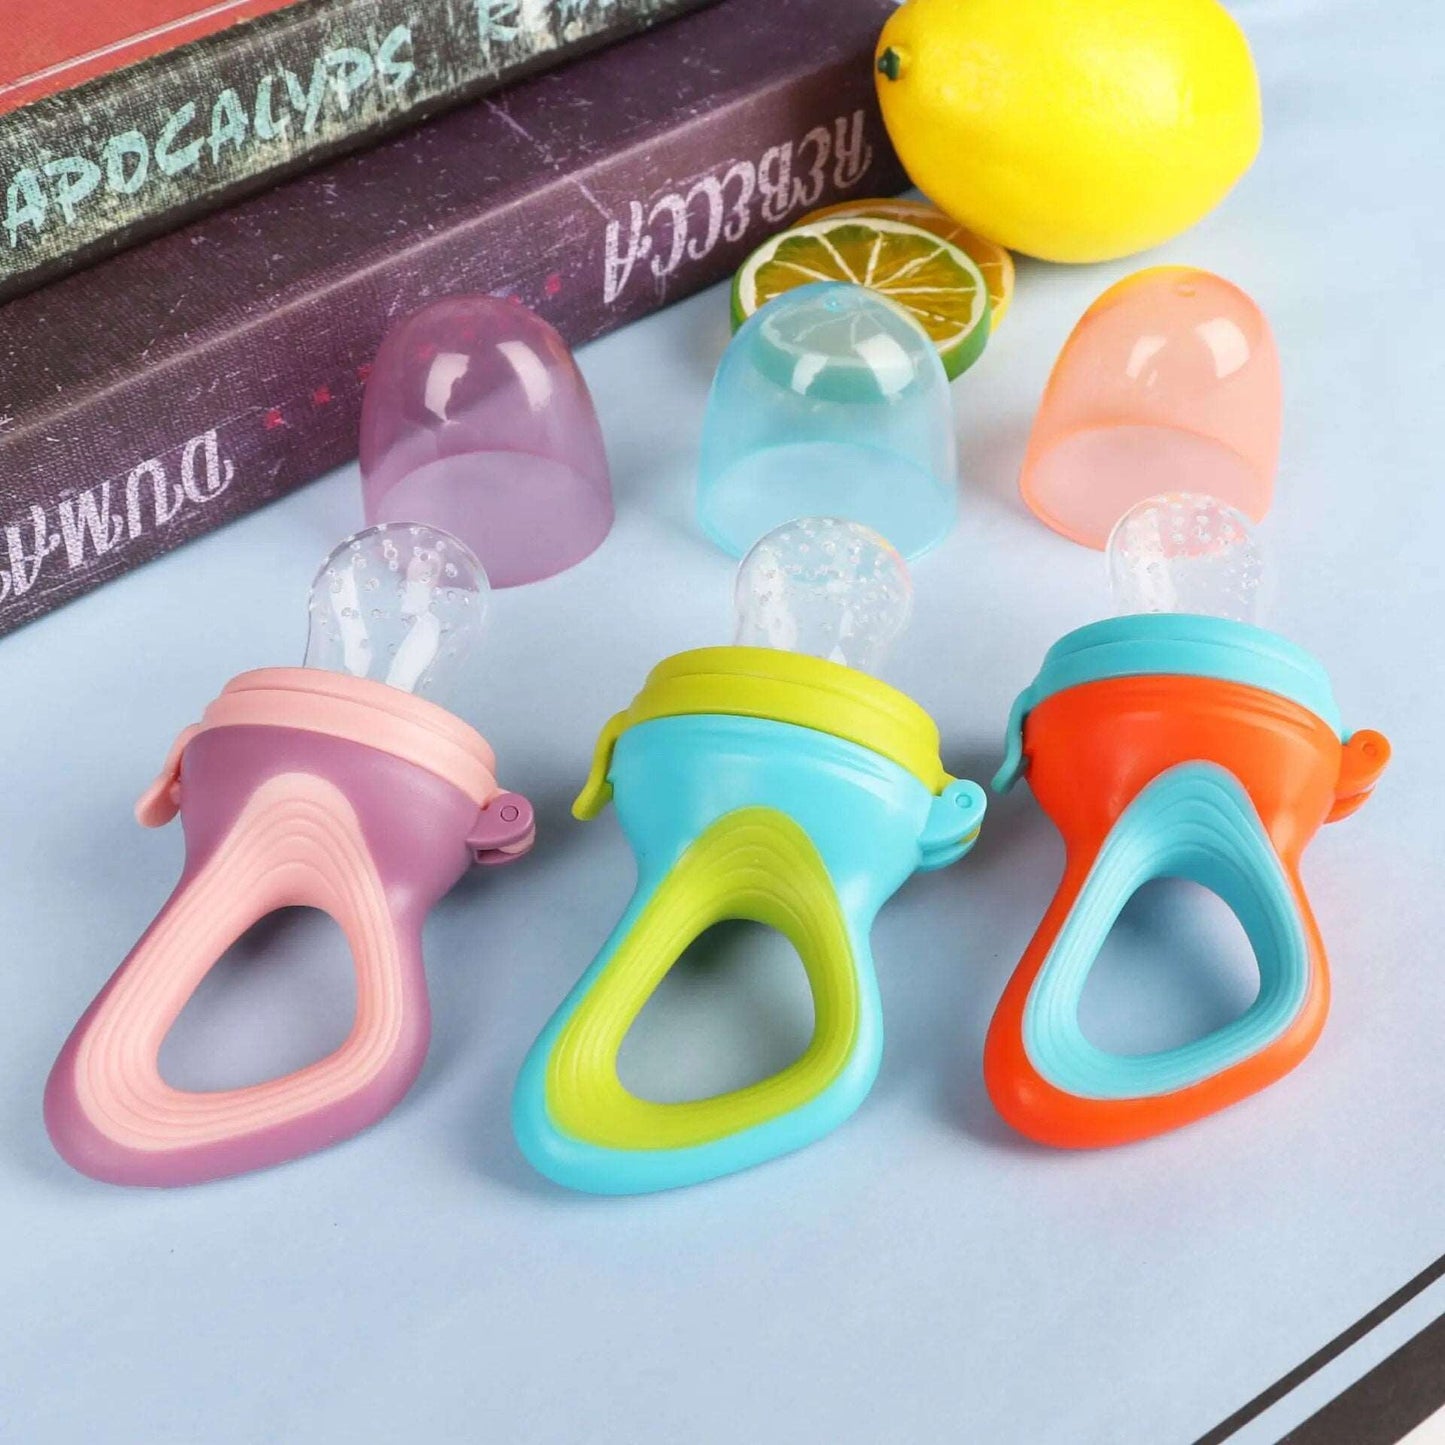 Baby Pacifier Feeder - Joe Baby Products